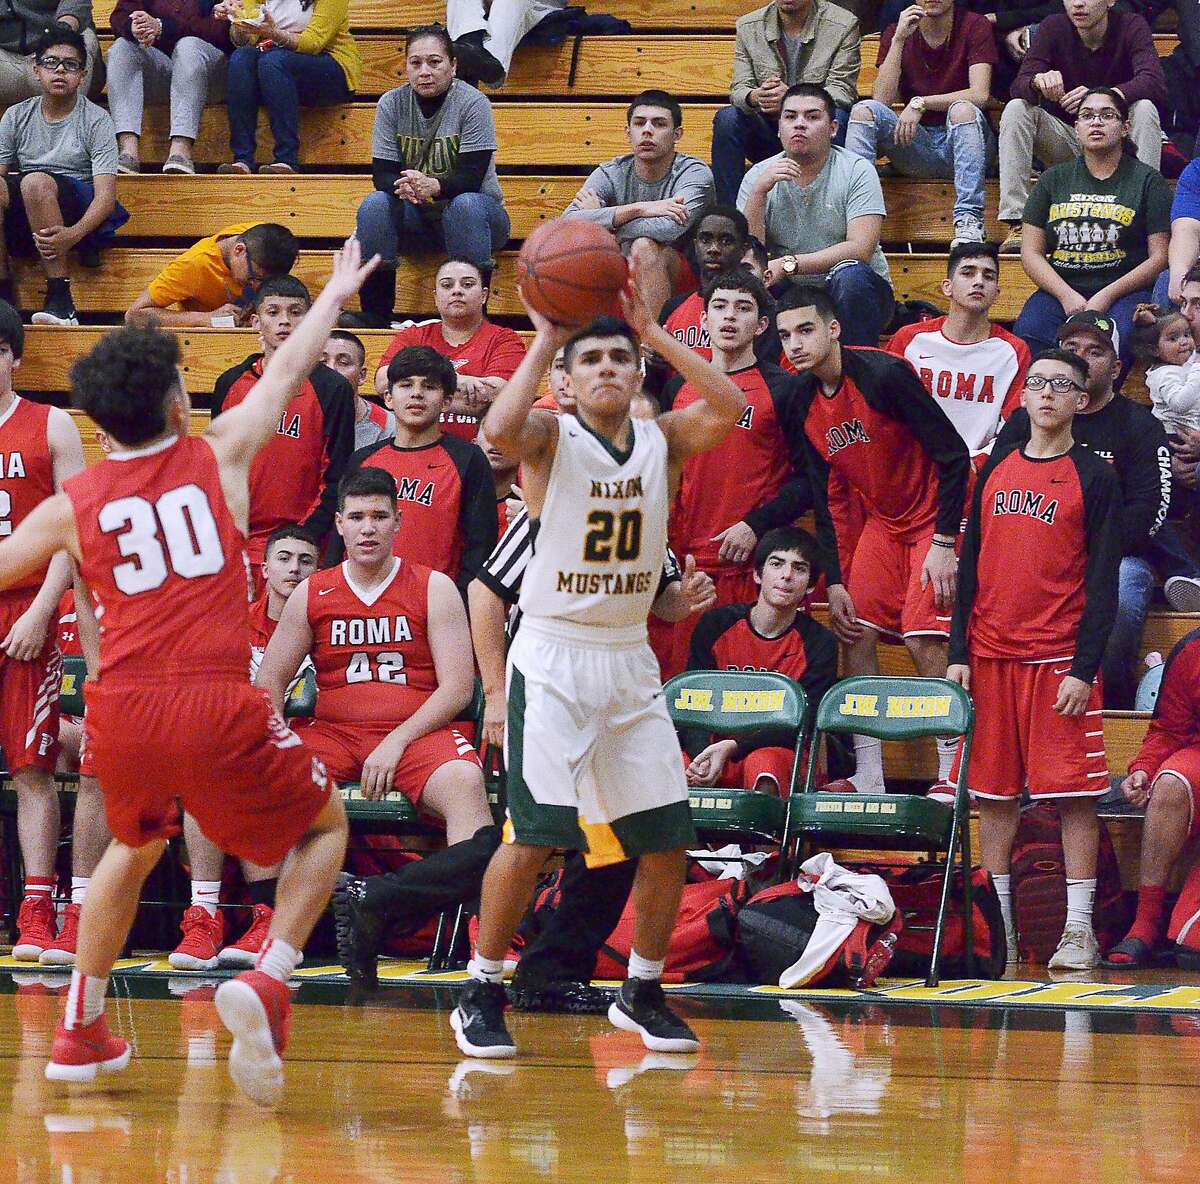 Joseph Garcia scored 14 points for Nixon in the Mustangs’ 82-64 win on Tuesday night against Roma.